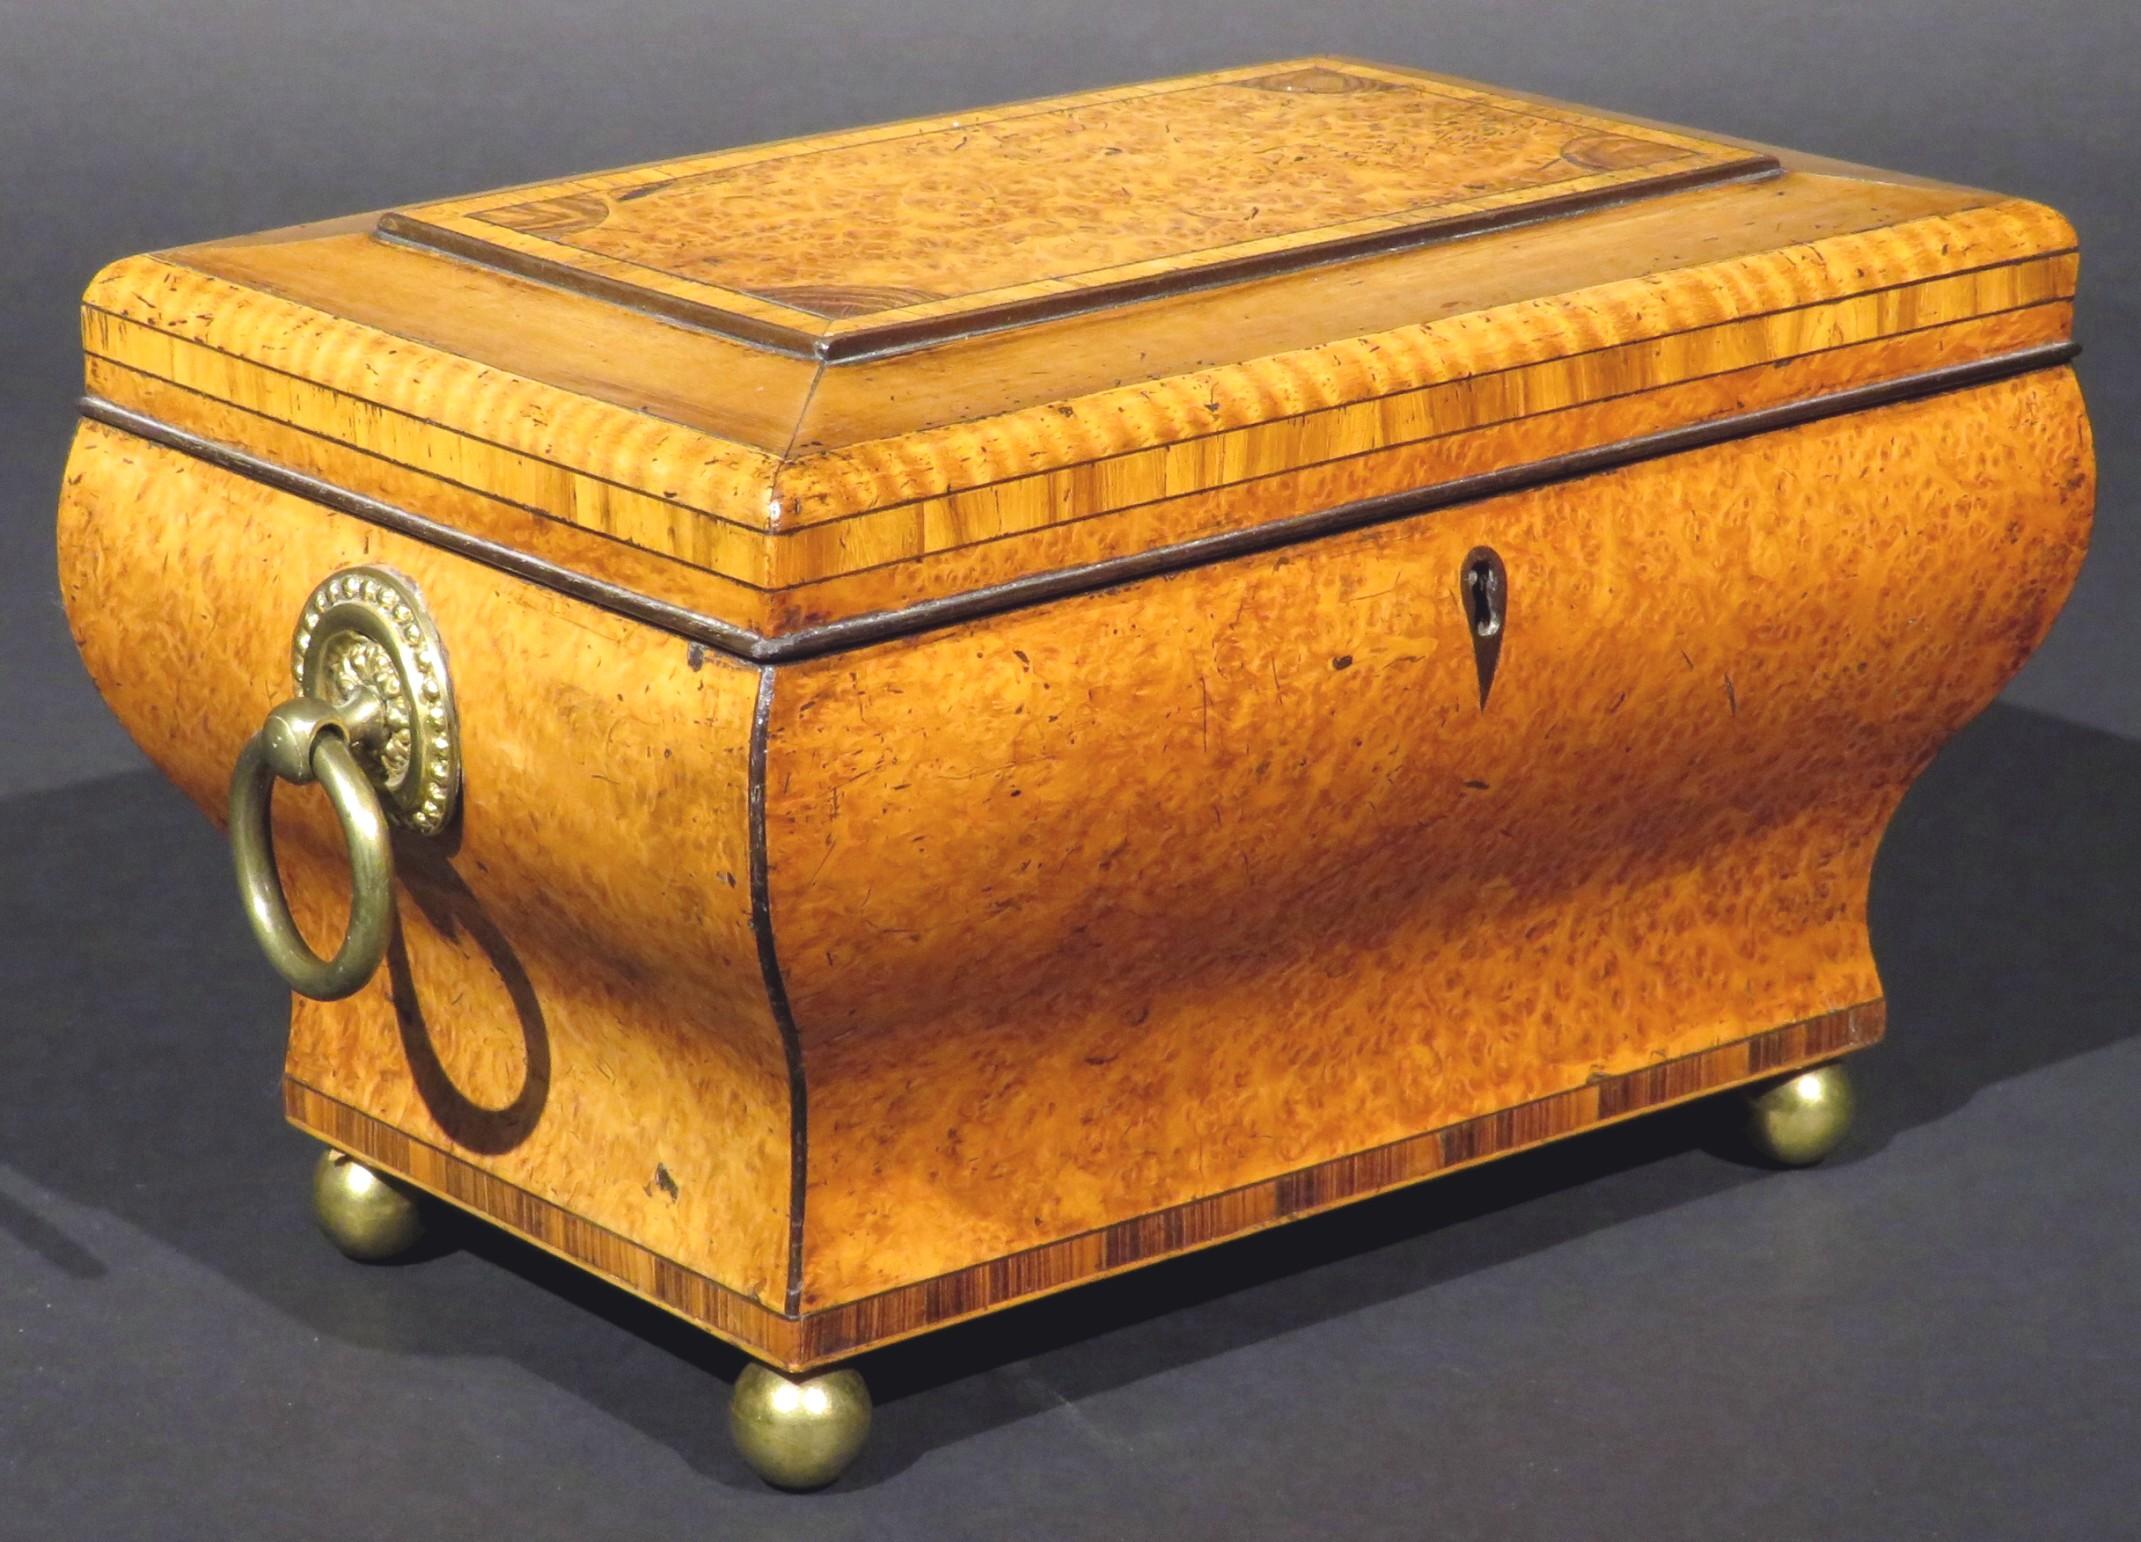 Inlay Very Fine Biedermeier Period Tea Caddy of Bombe Form in Exotic Woods, circa 1830 For Sale